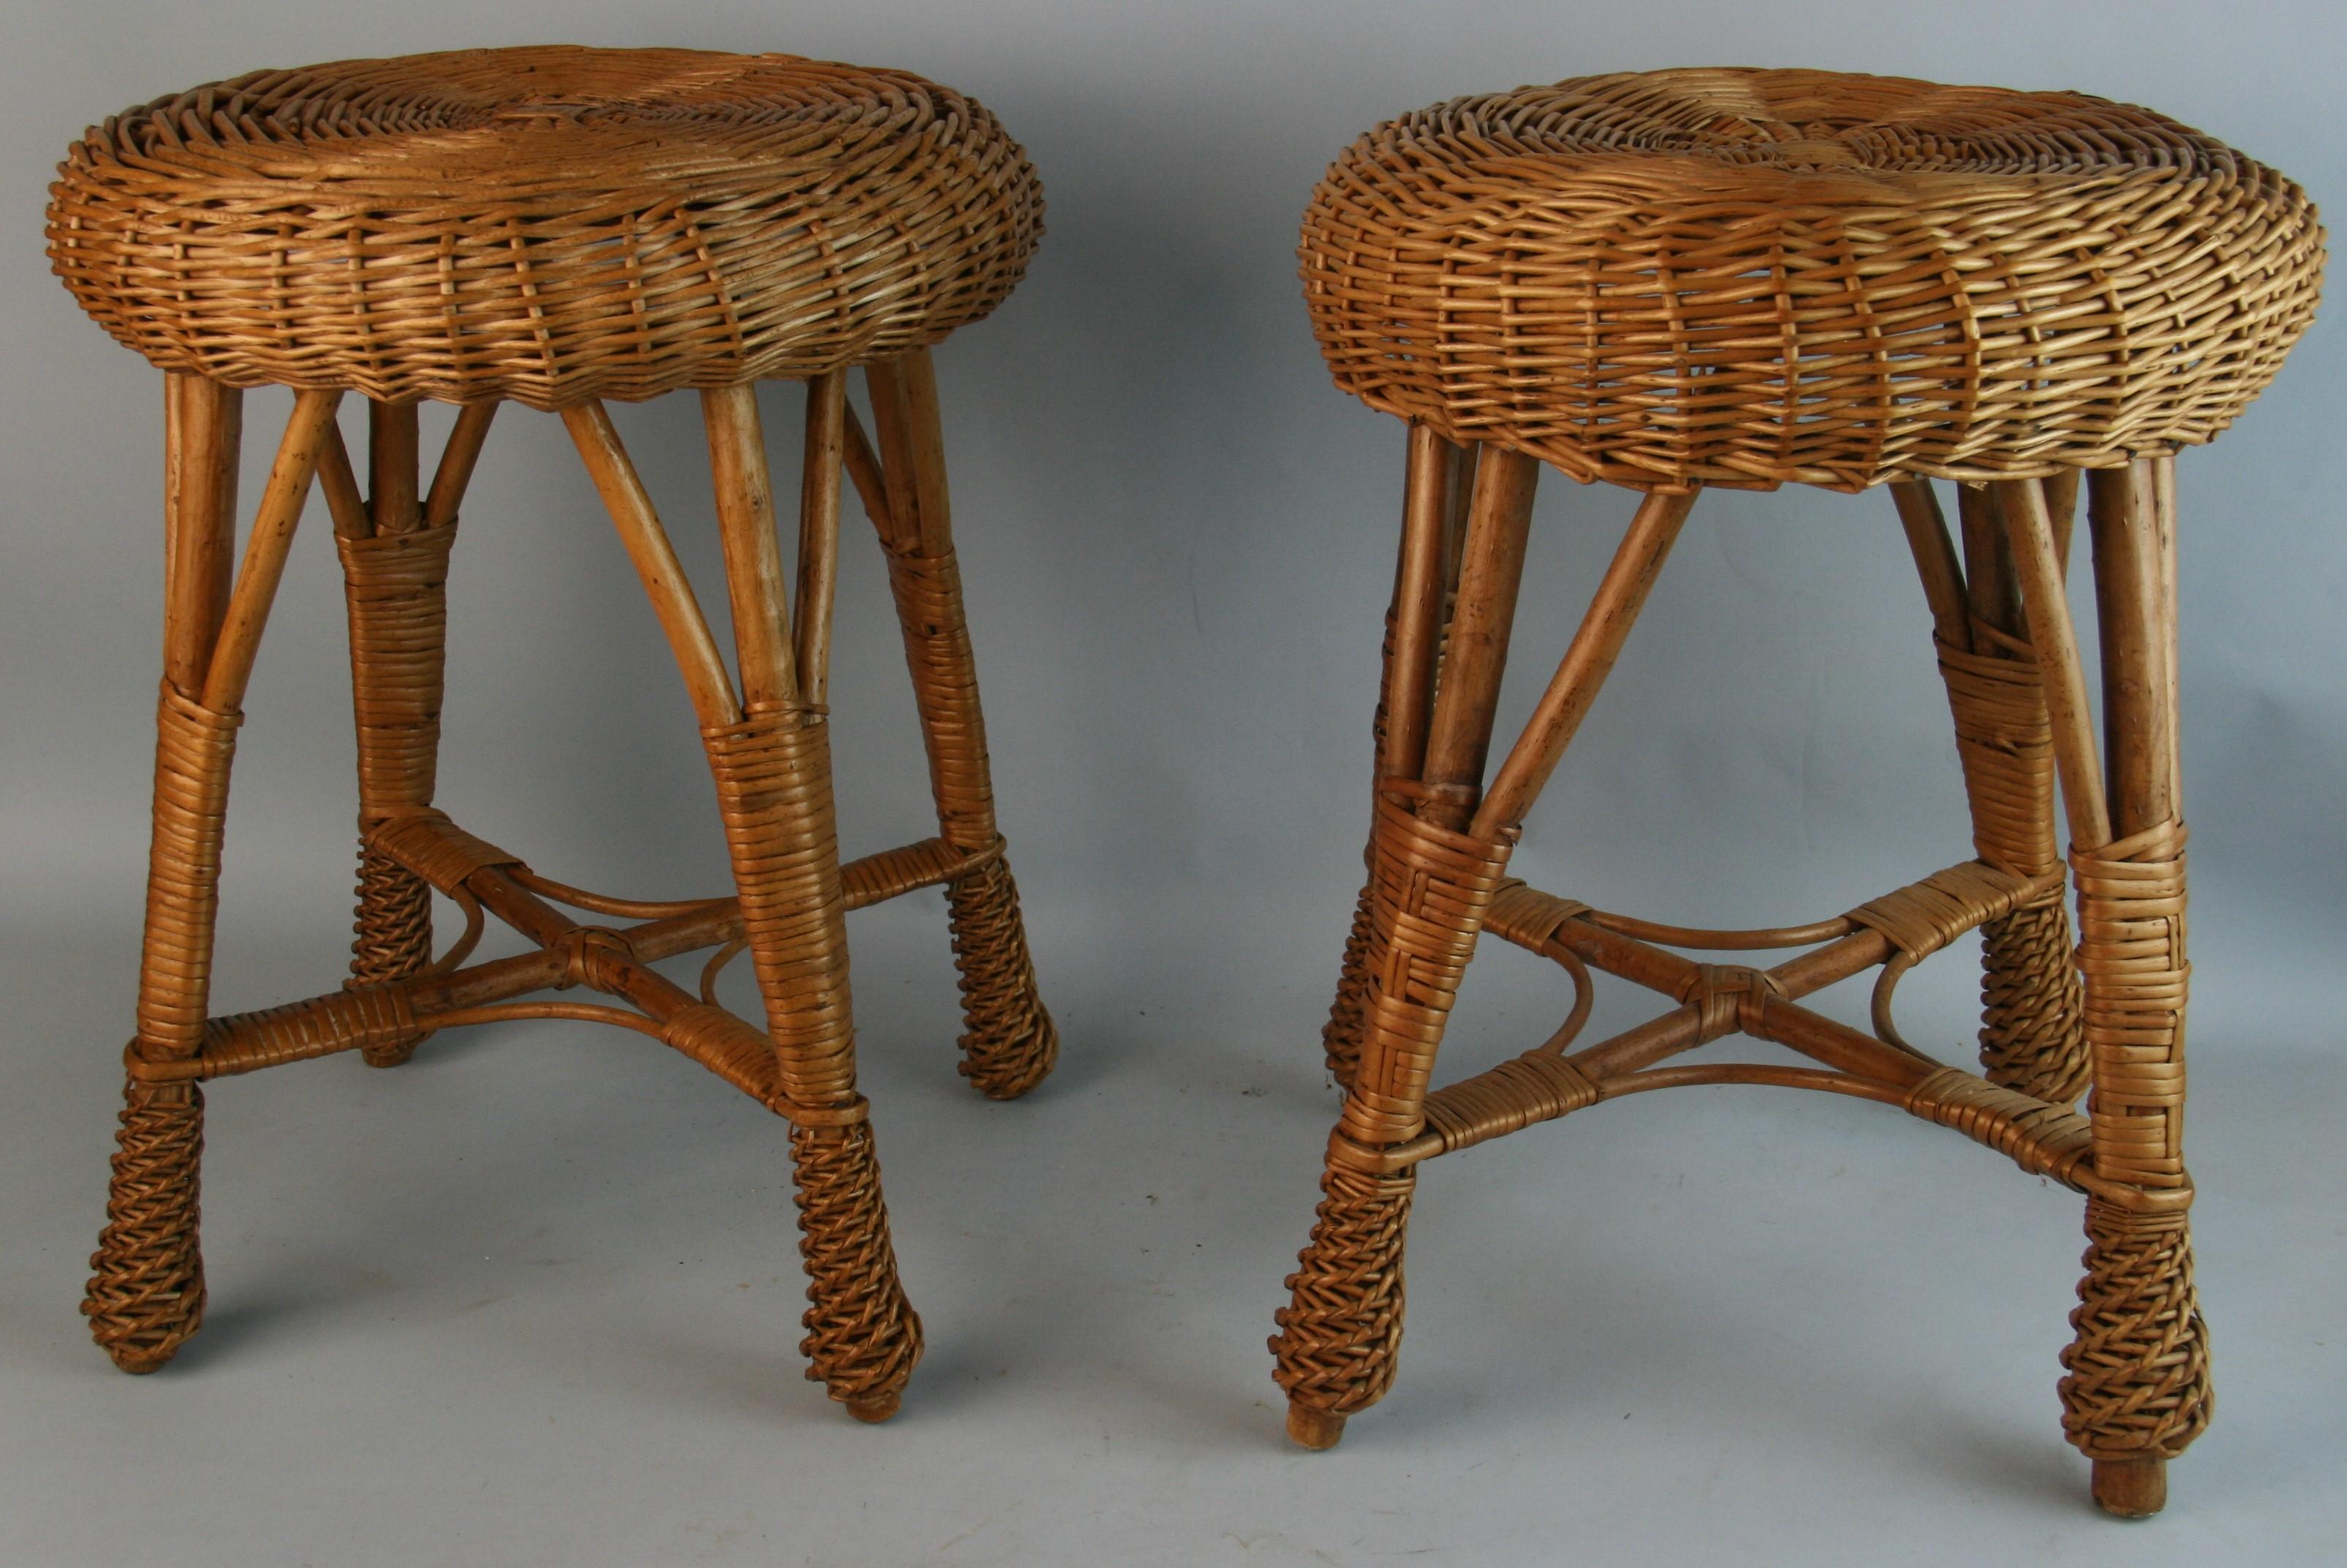 1472 Pair French hand woven willow stools/small side tables
Top diameter 14